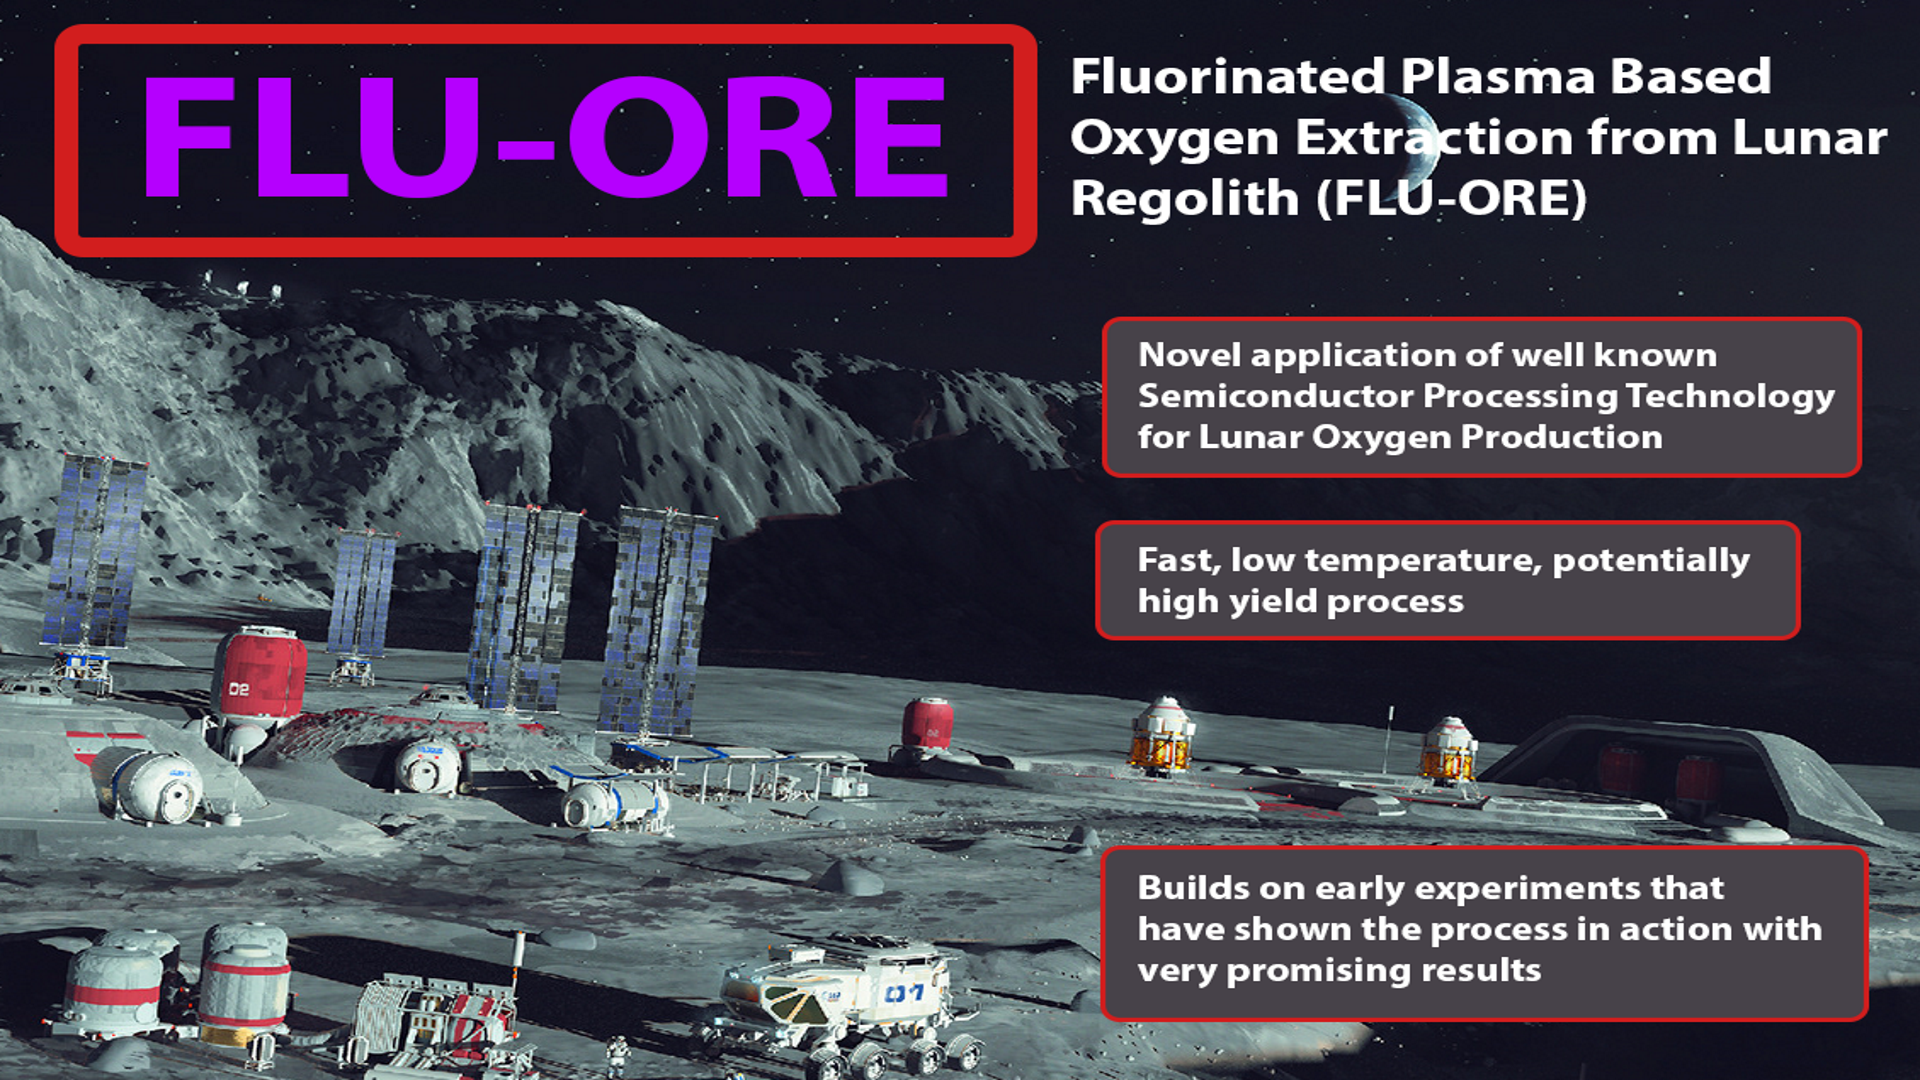 Fluorinated Plasma Based Oxygen Extraction from Lunar Regolith (FLU-ORE)